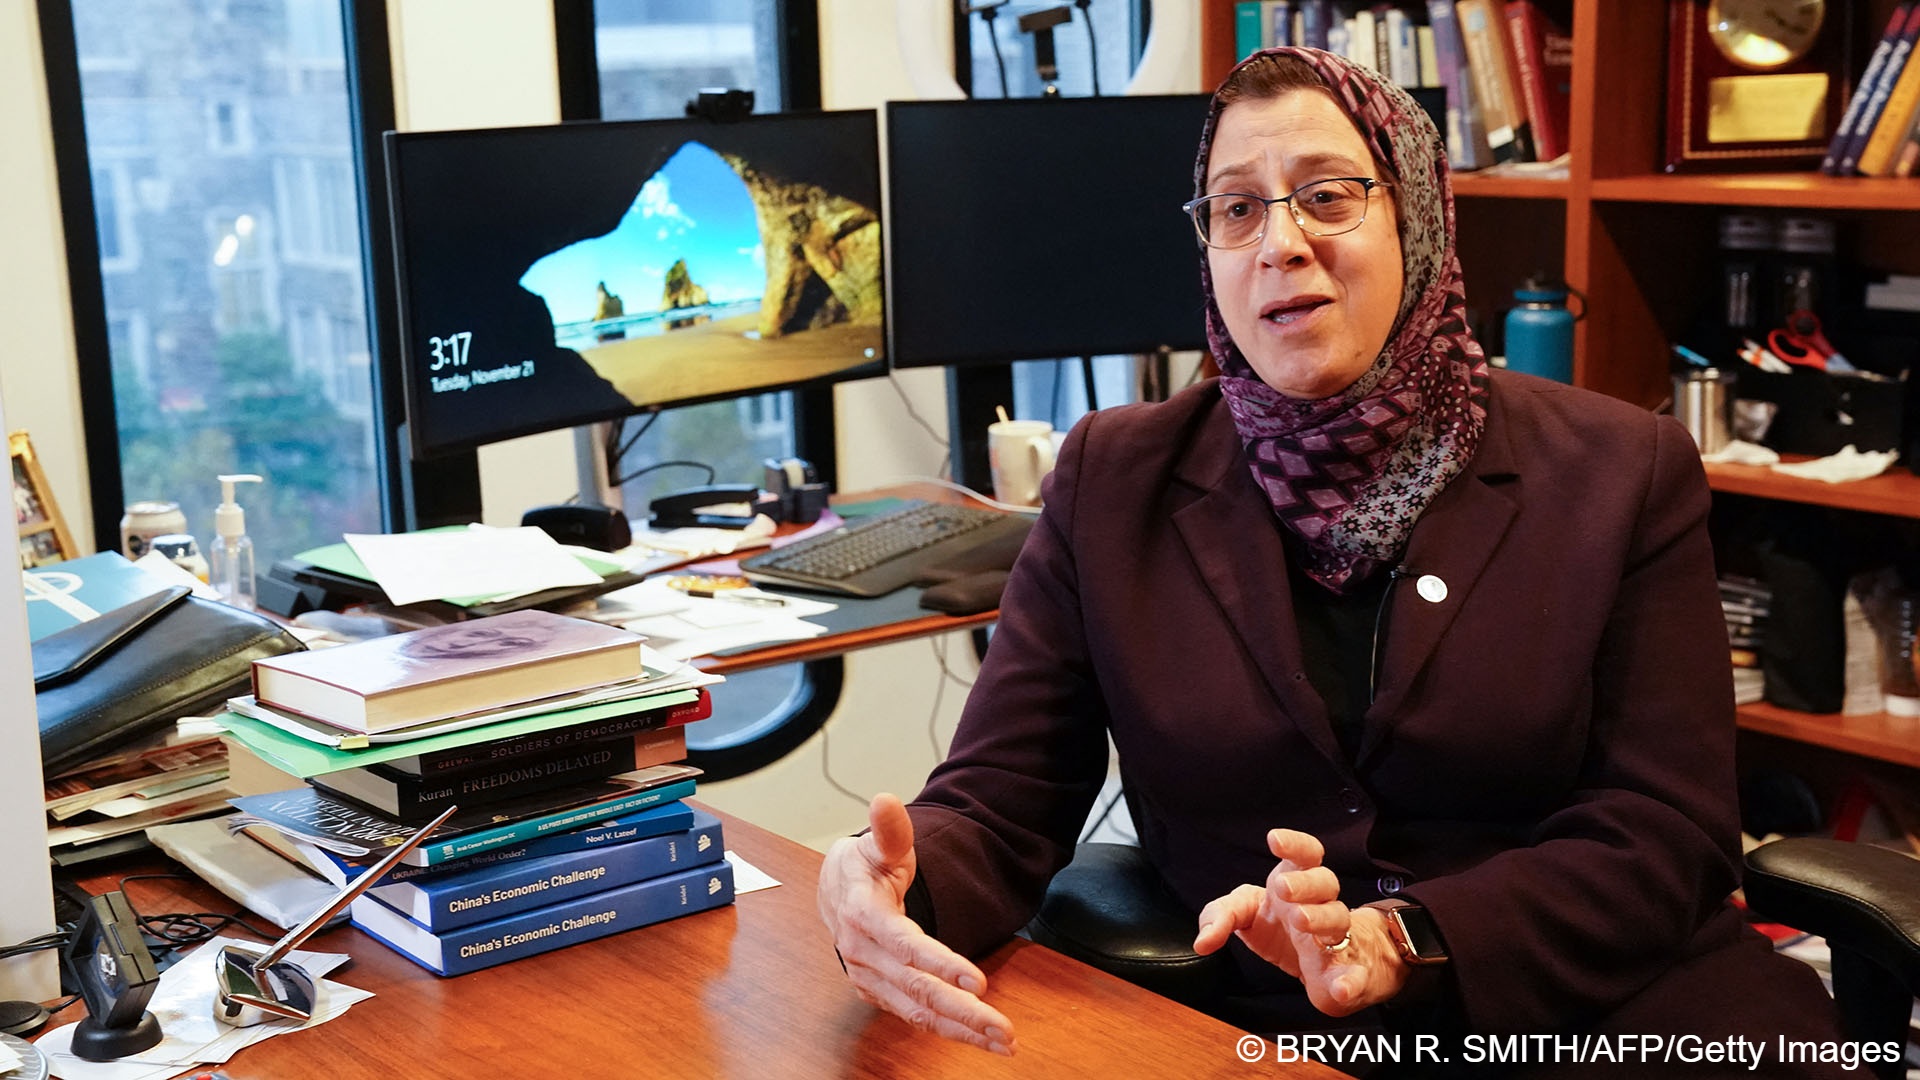 Wearing a headscarf, Amaney Jamal sits at her desk in an office strewn with books and papers. In the background are two monitors and book shelves